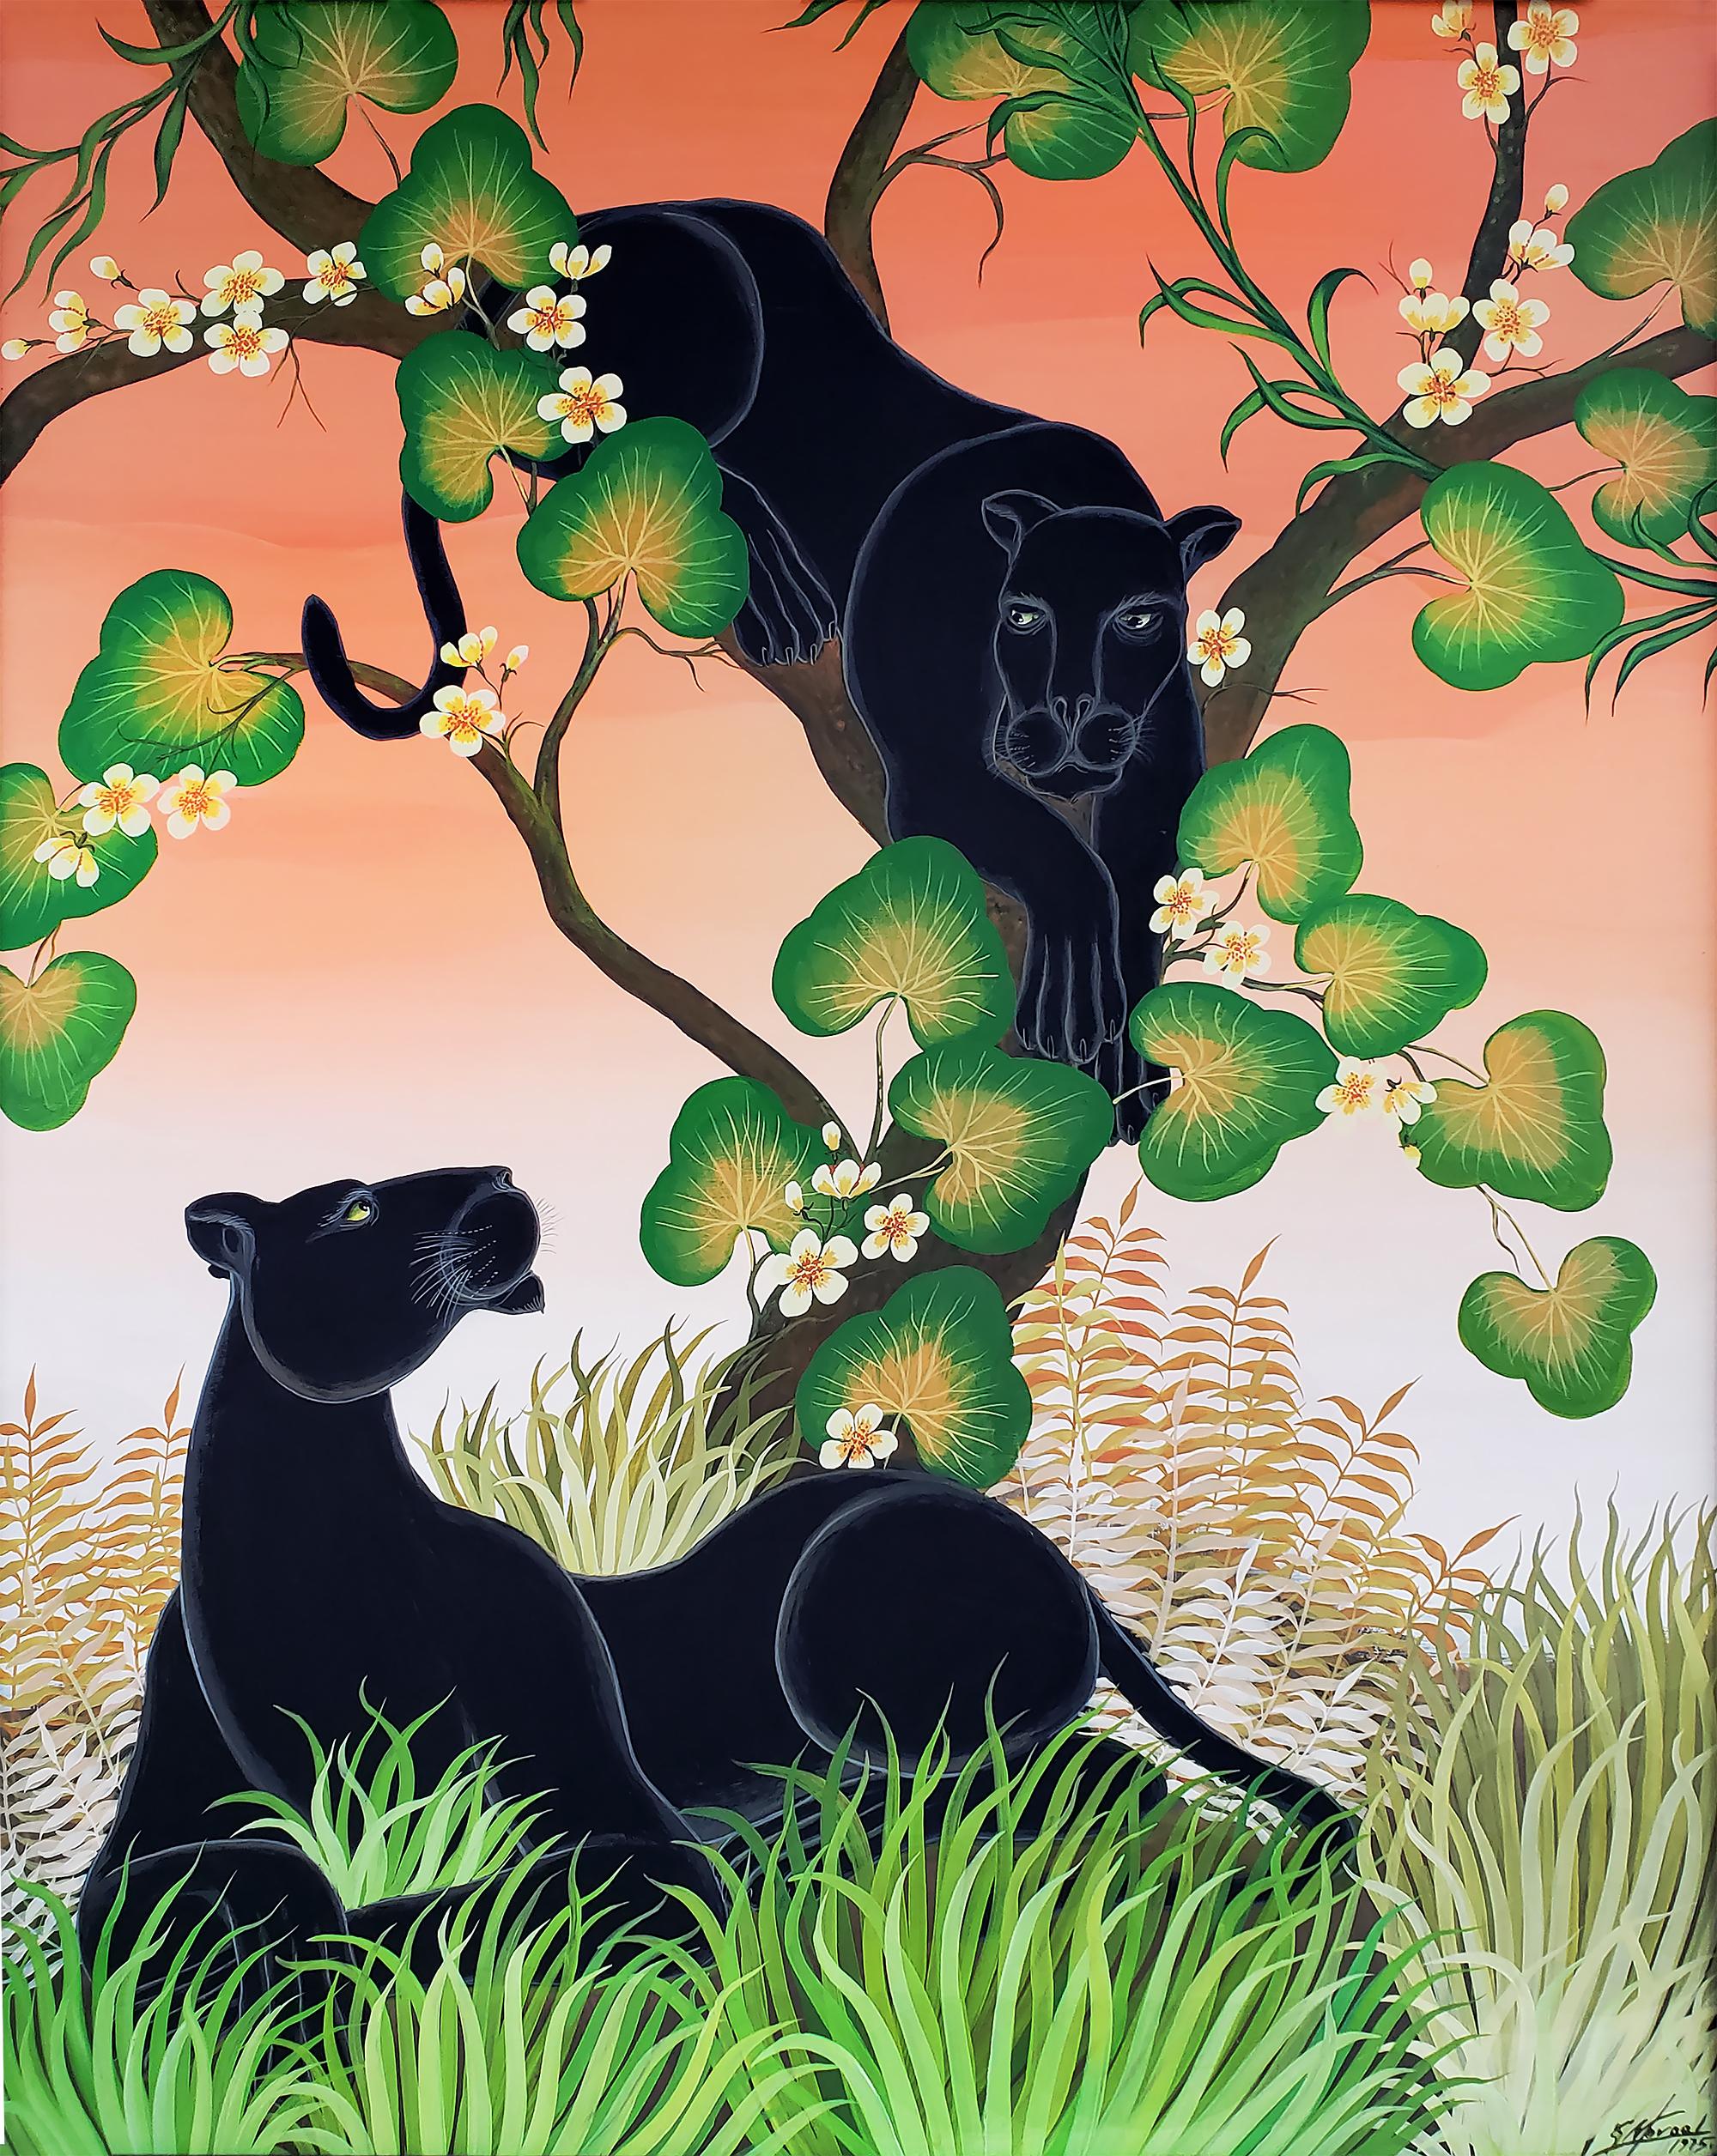 Gustavo Novoa Animal Painting - Black Panthers in a tree with a peach sky